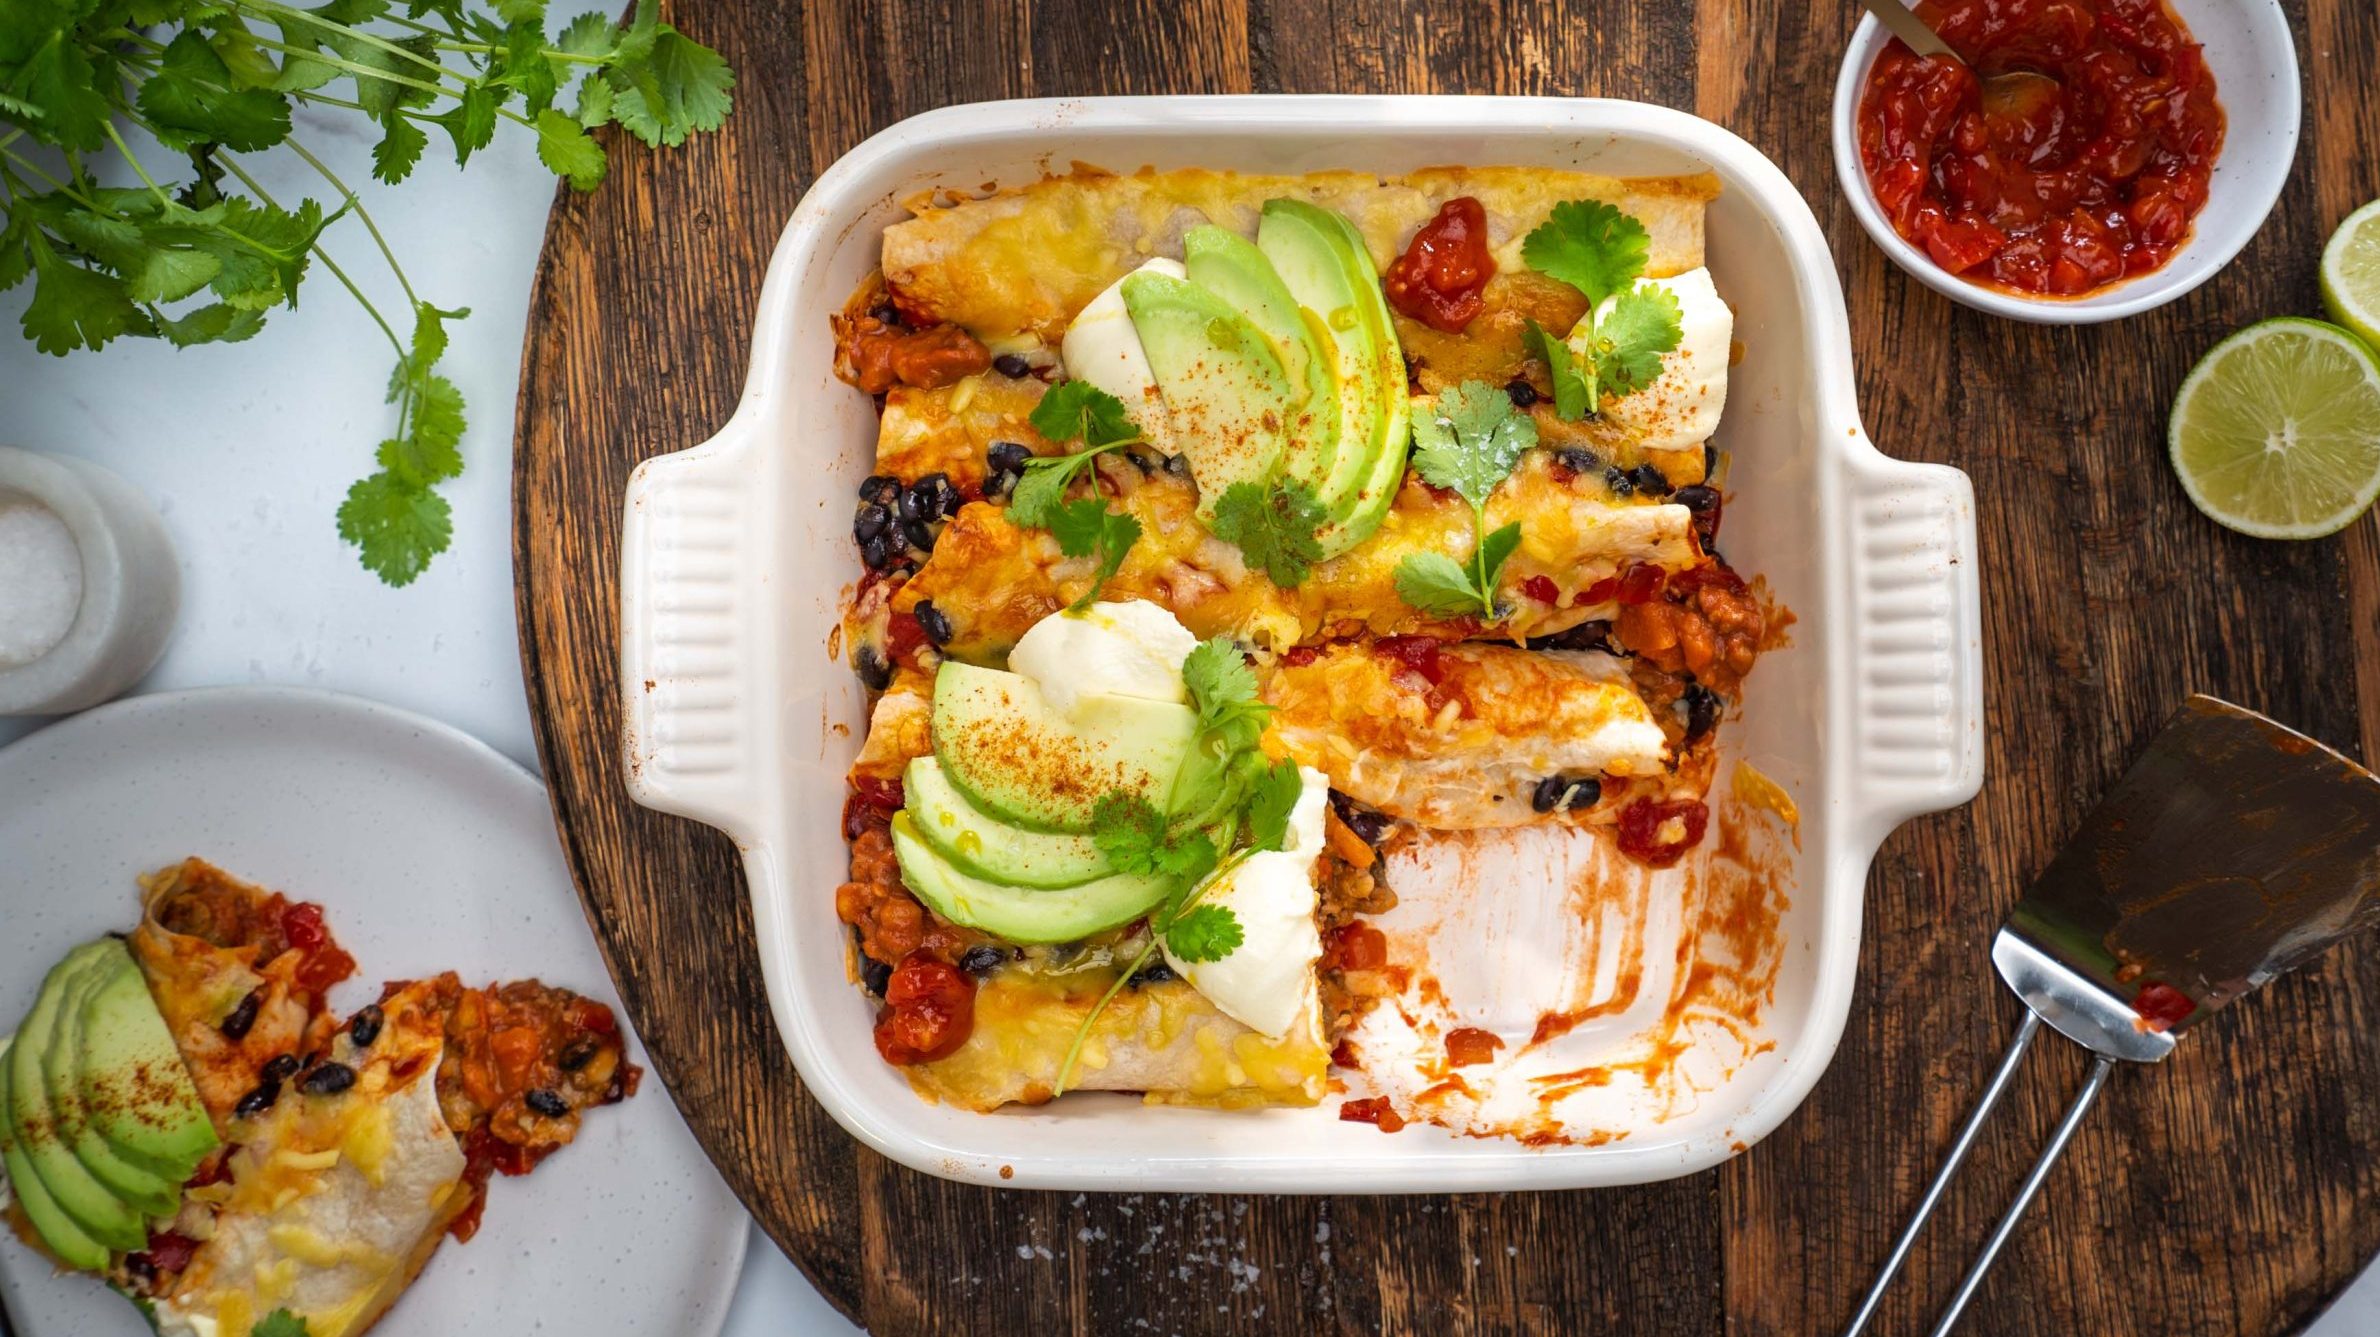 Baked enchiladas topped with sliced avocado and sour cream in square dish with a portion served on a plate.